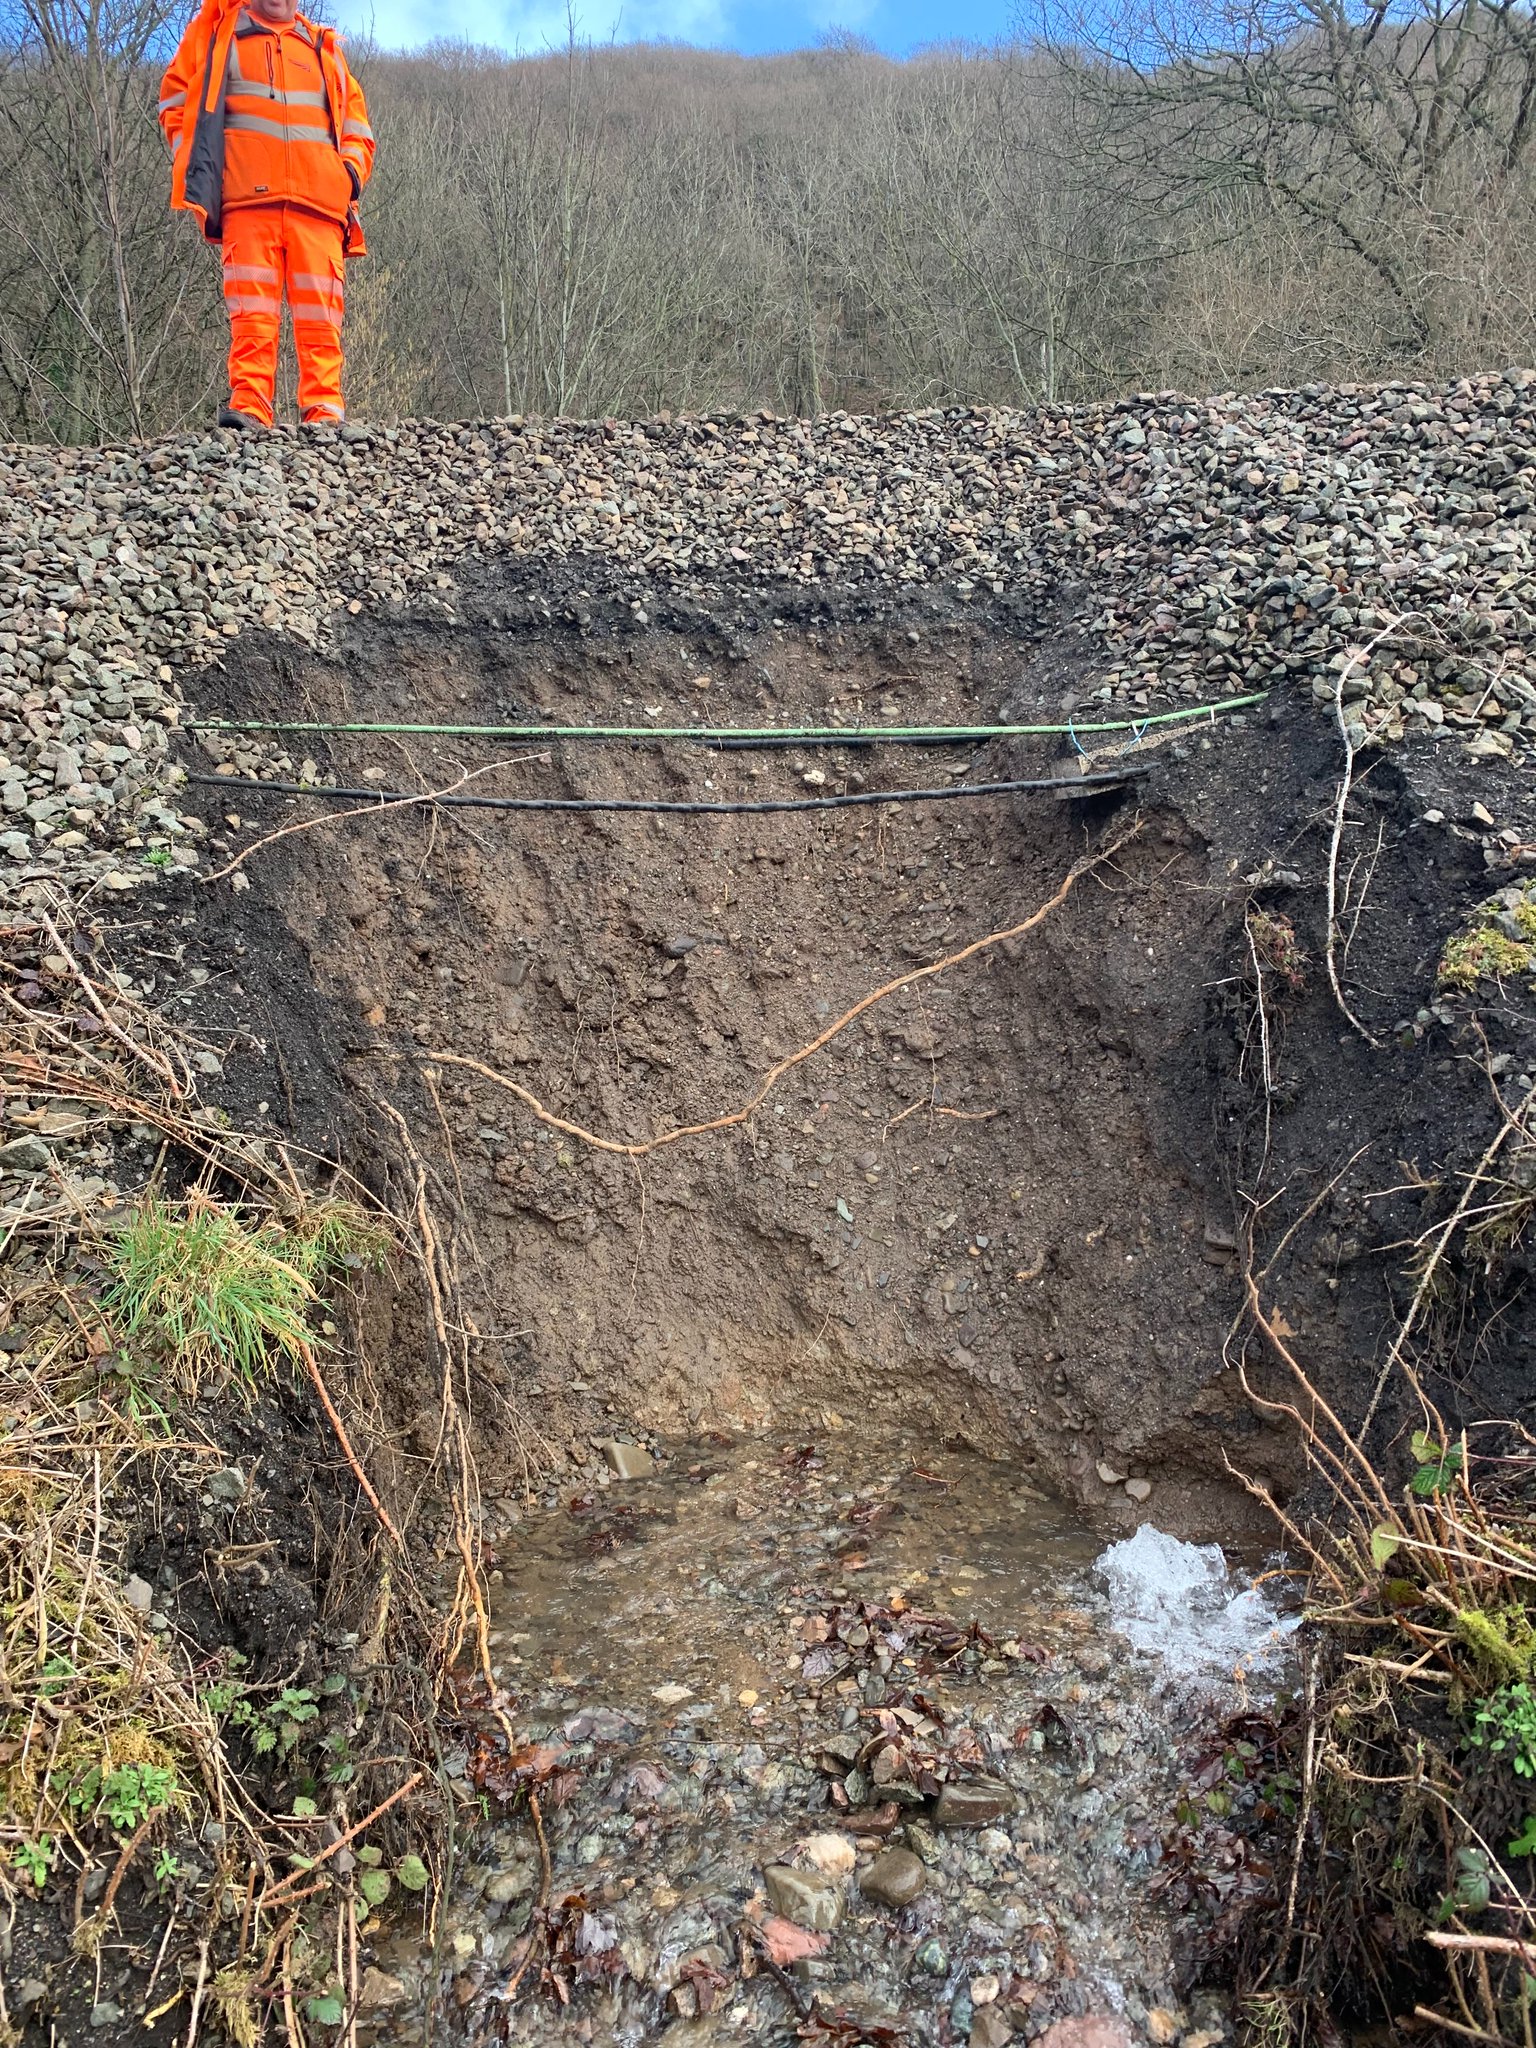 NEWS | Bus services replacing trains between Hereford and Shrewsbury due to a landslip